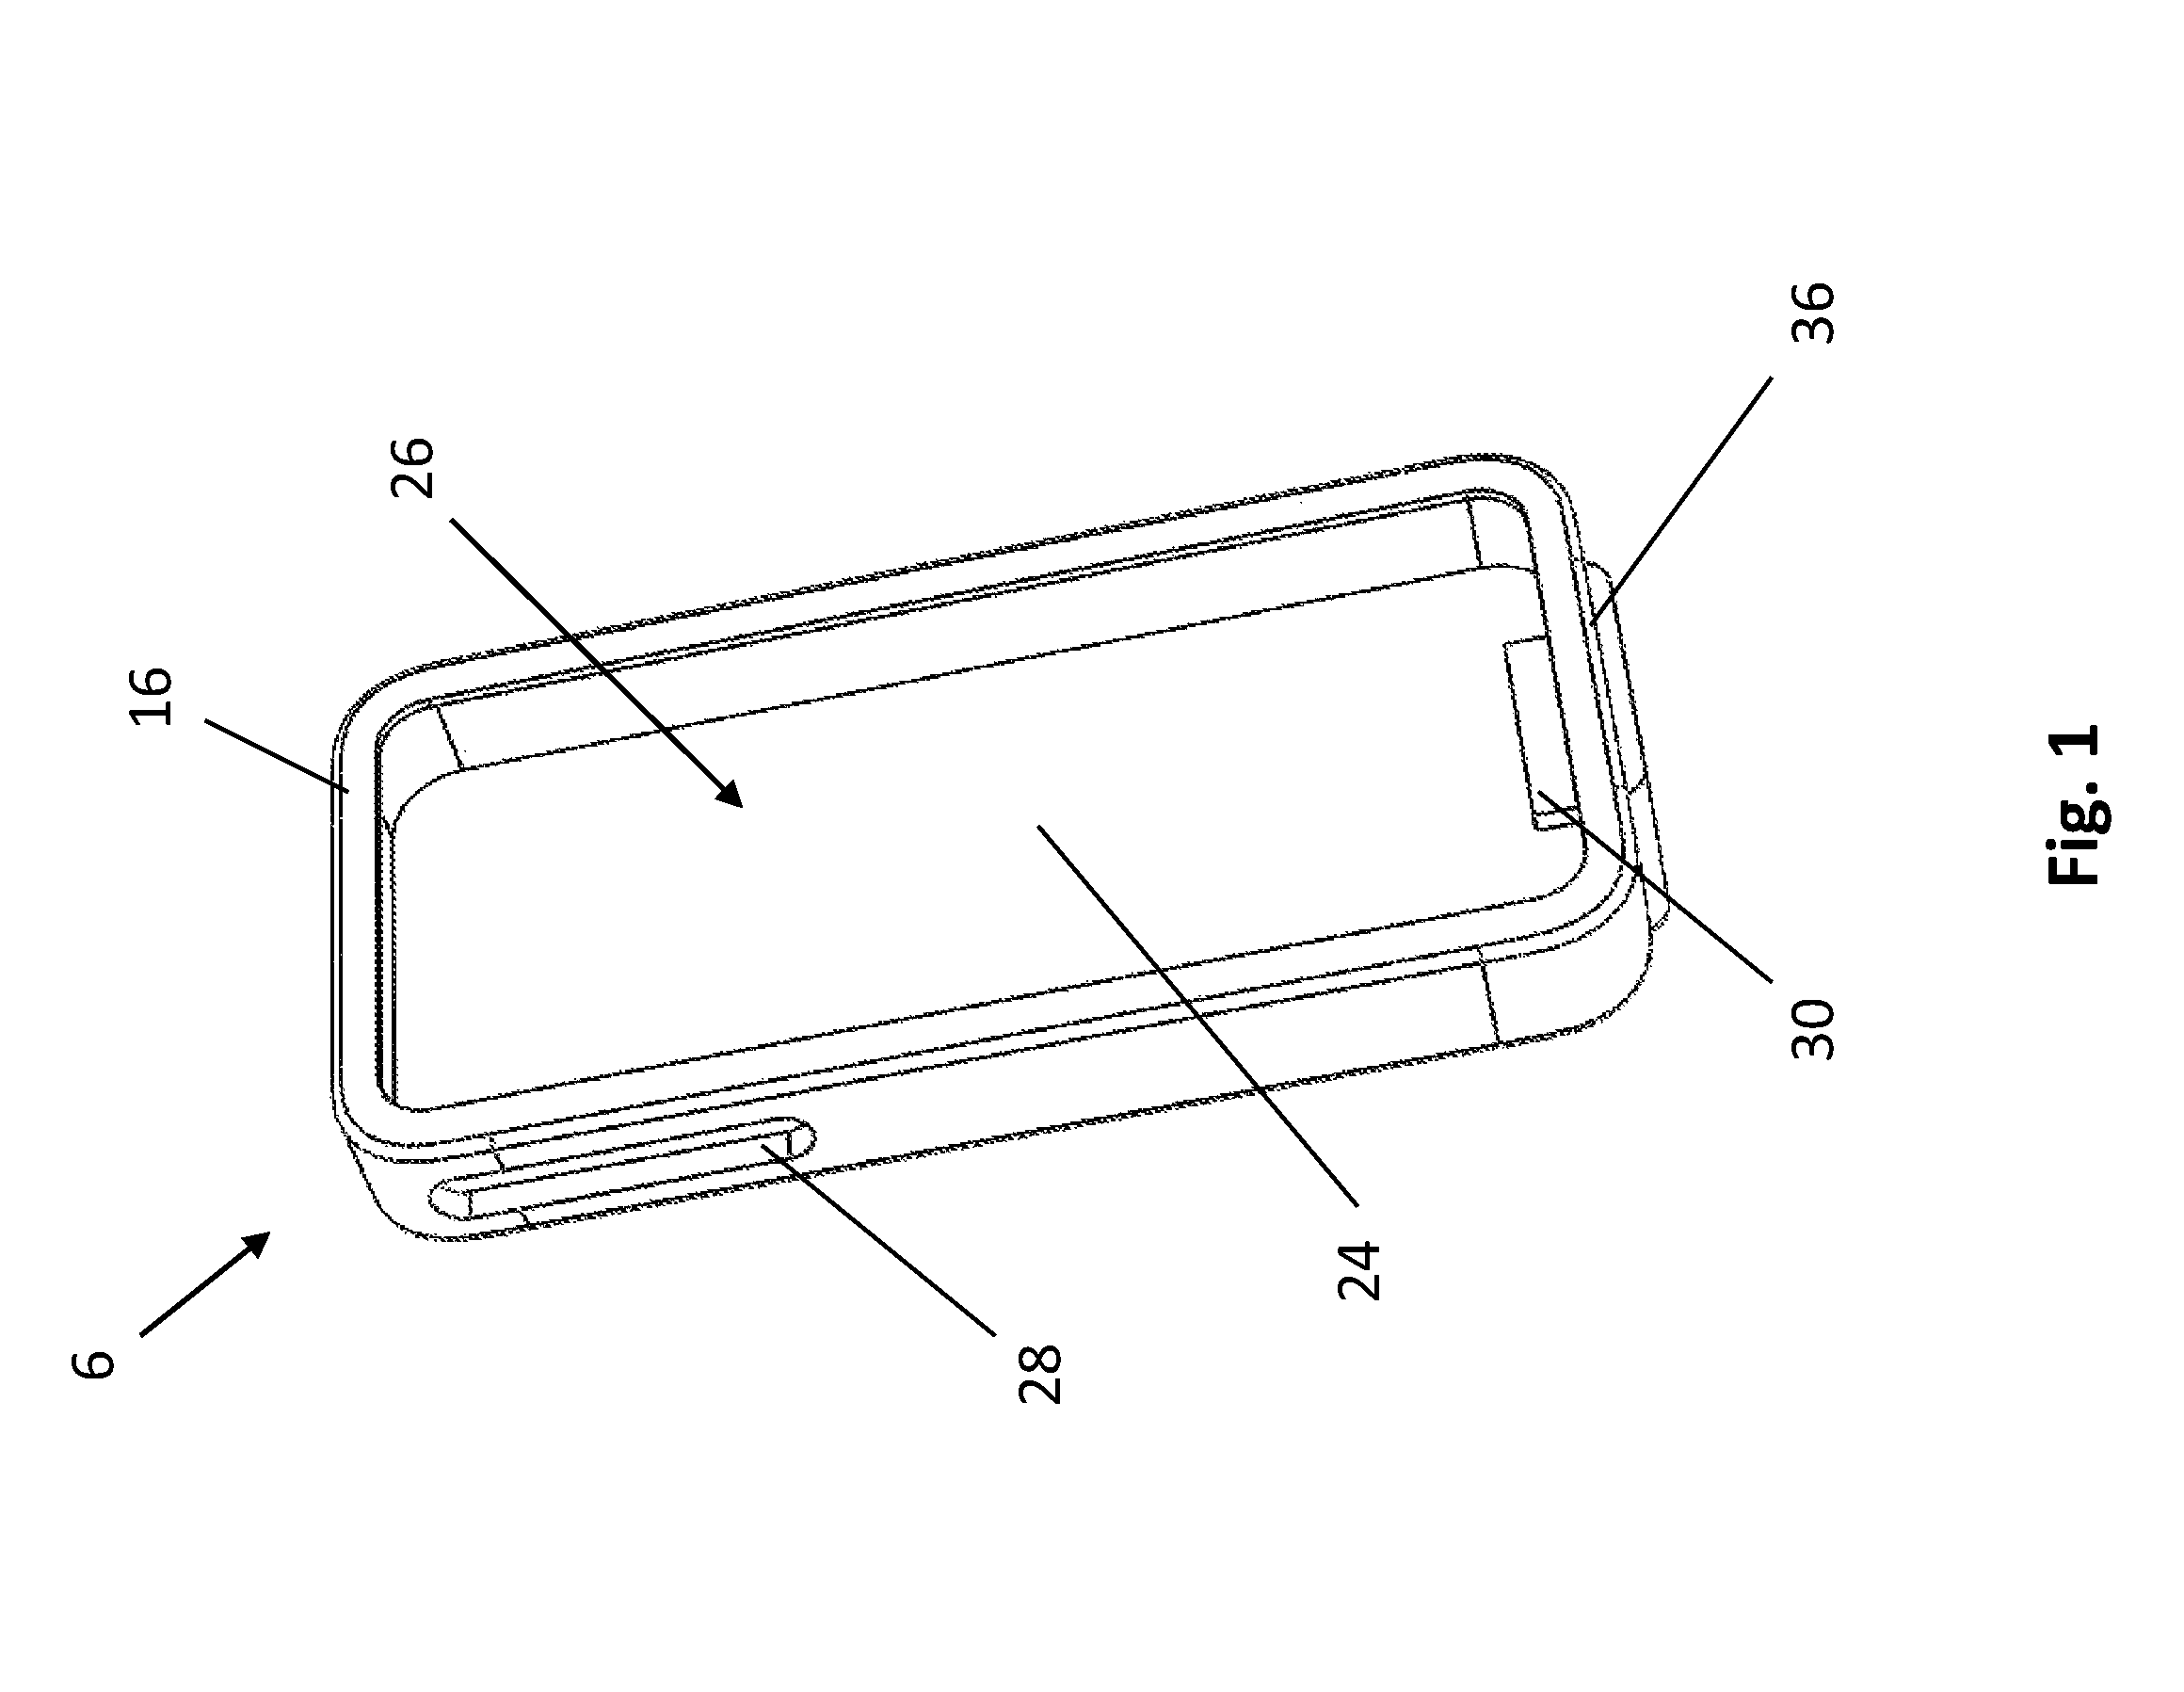 Injector device